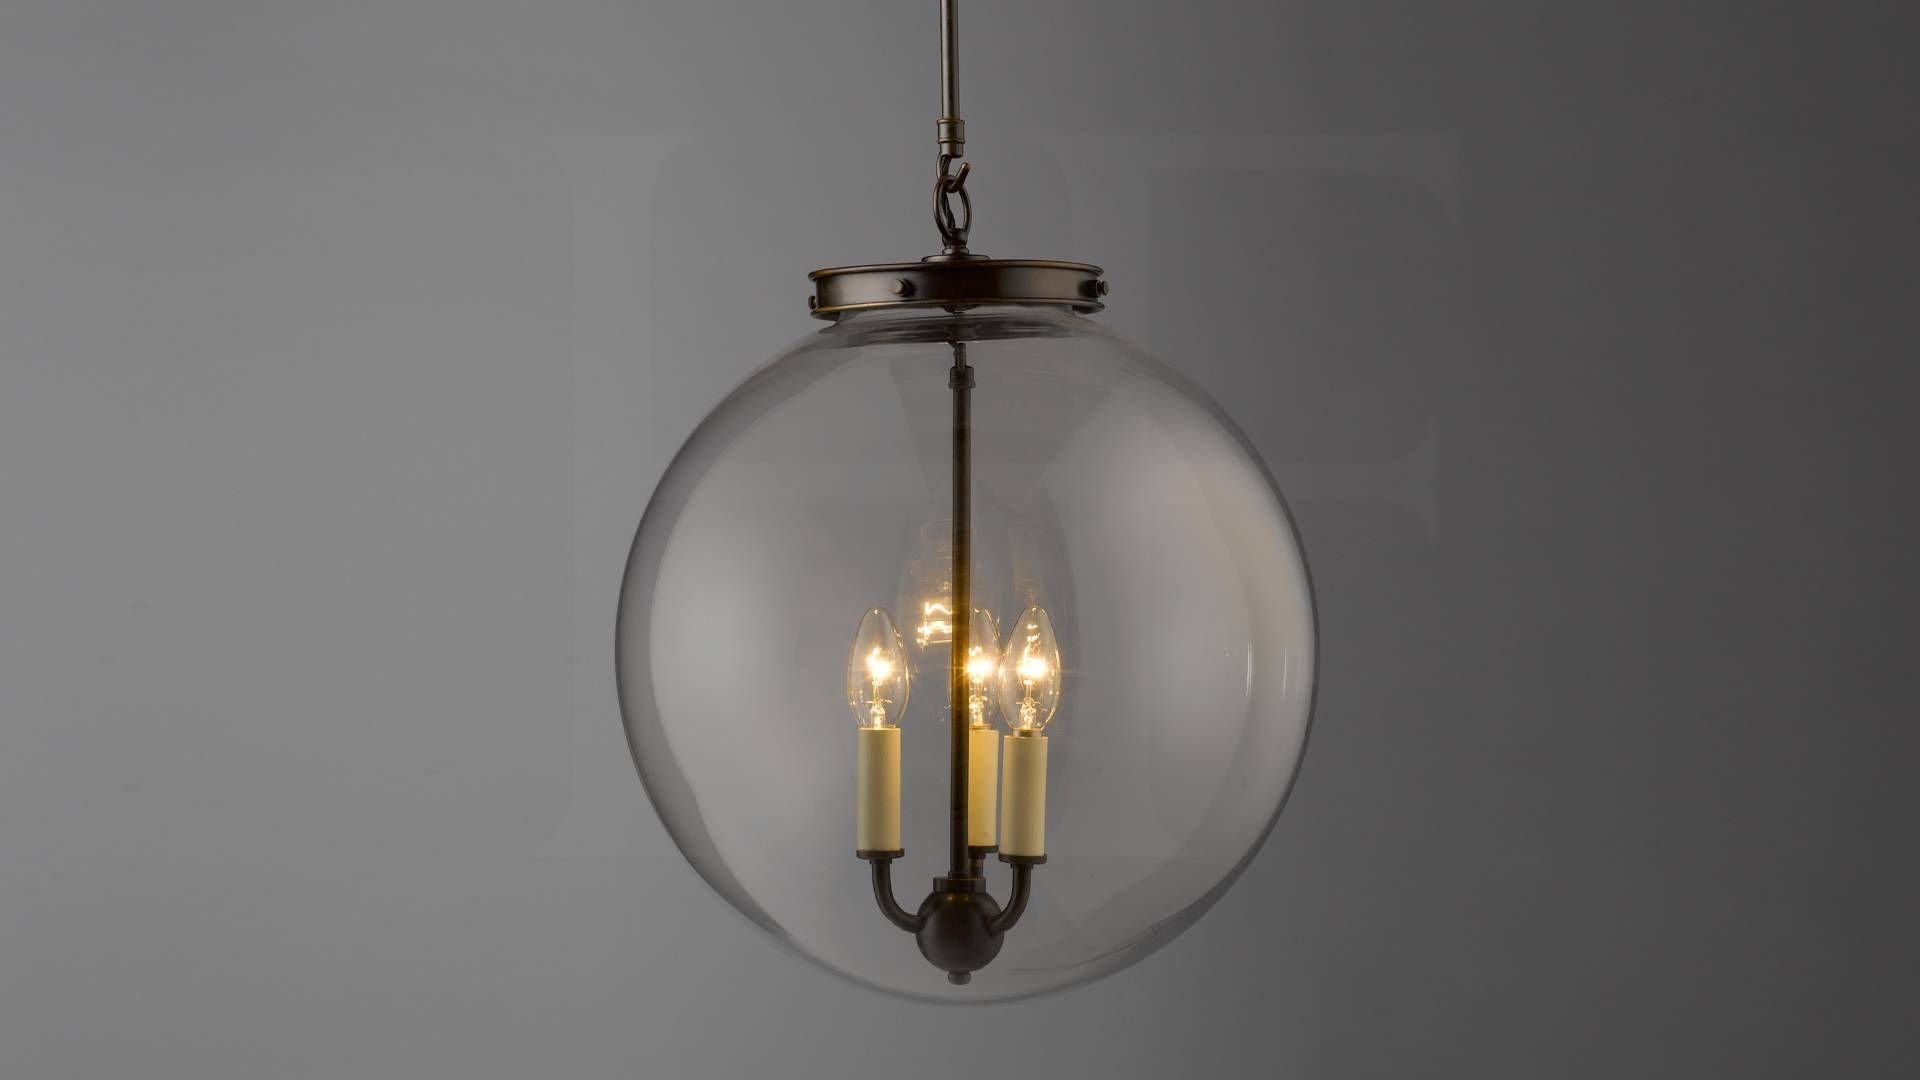 Hector Glass Globe, Largehector Finch Lighting Intended For Glass Orb Lights (View 12 of 15)